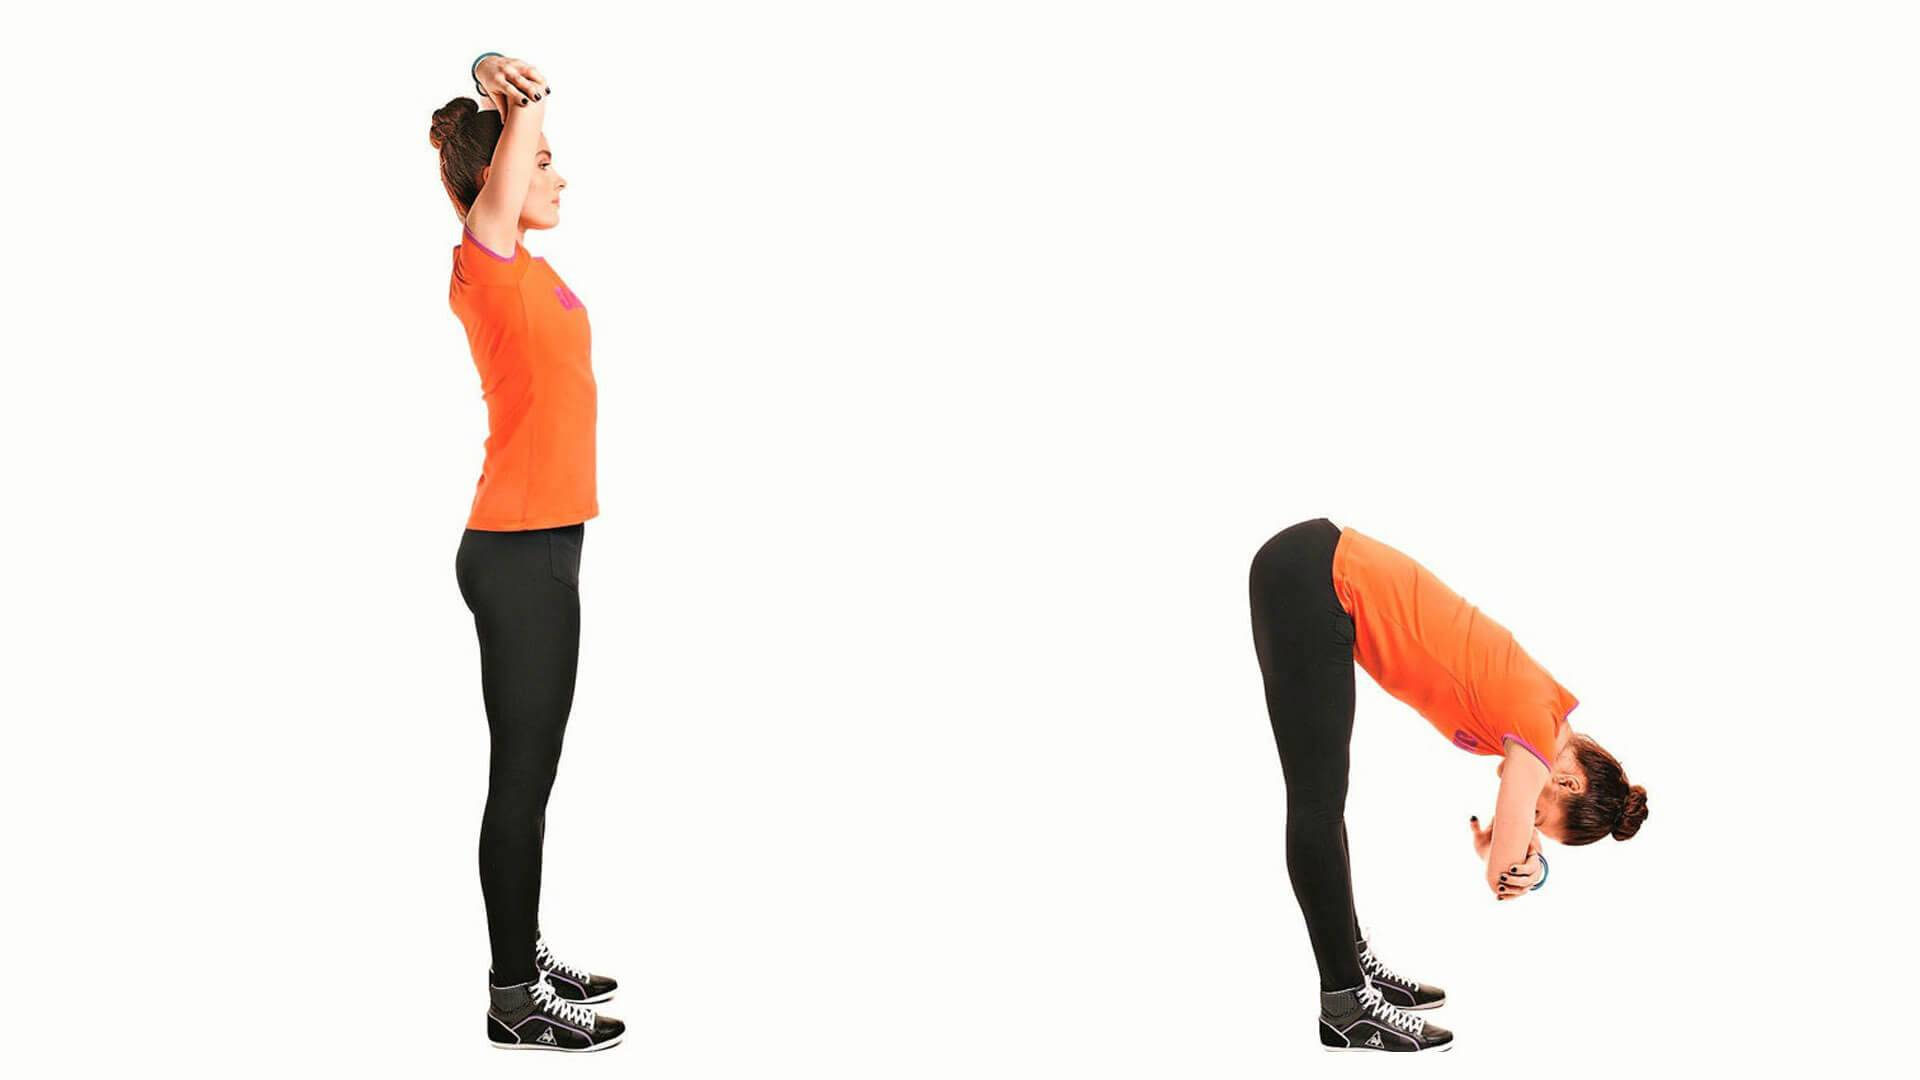 Woman performing standing hip flexor stretch - Standing mobility exercises for flexibility and strength